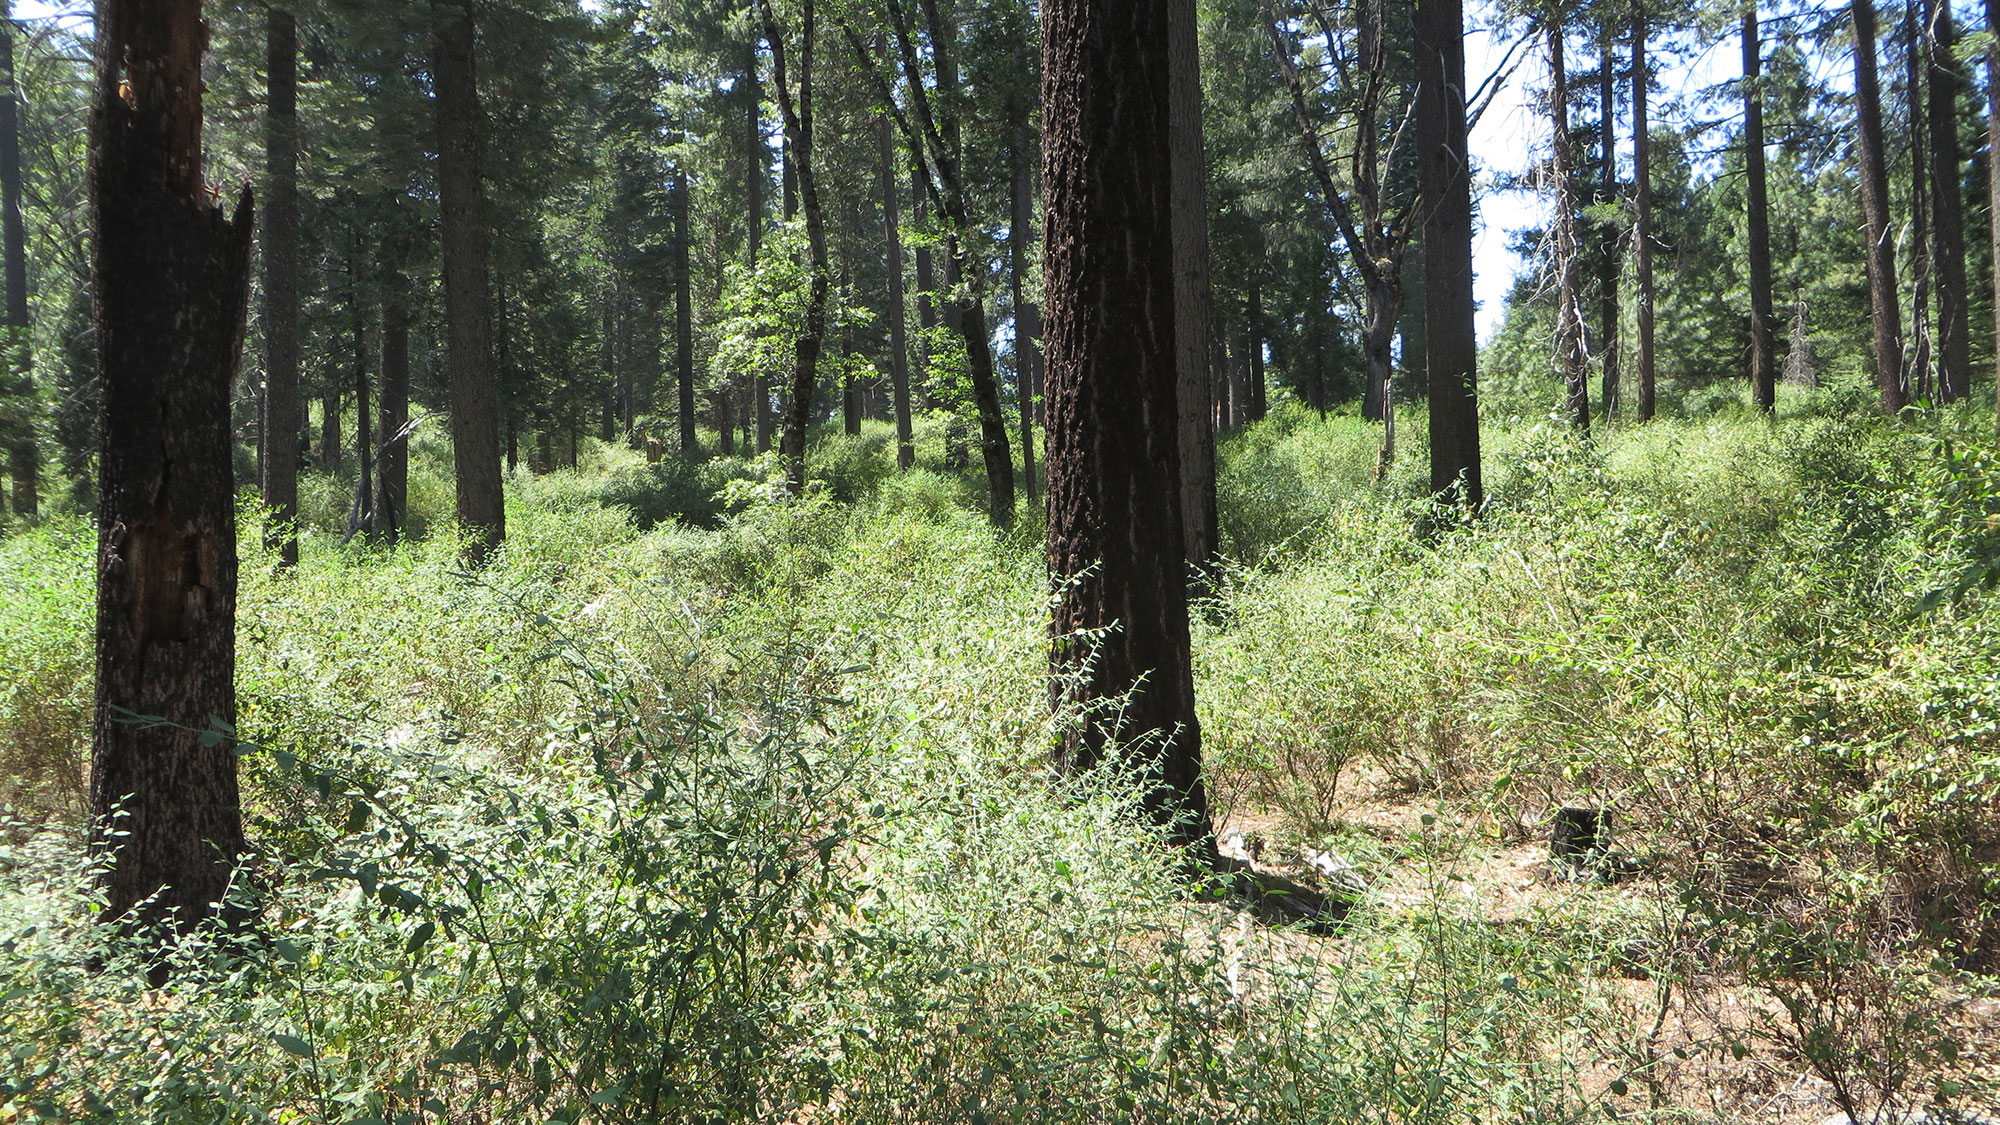 A photo of a section of a conifer forest on a sunny day. The forest floor covered in small green bushes, a few feet high.